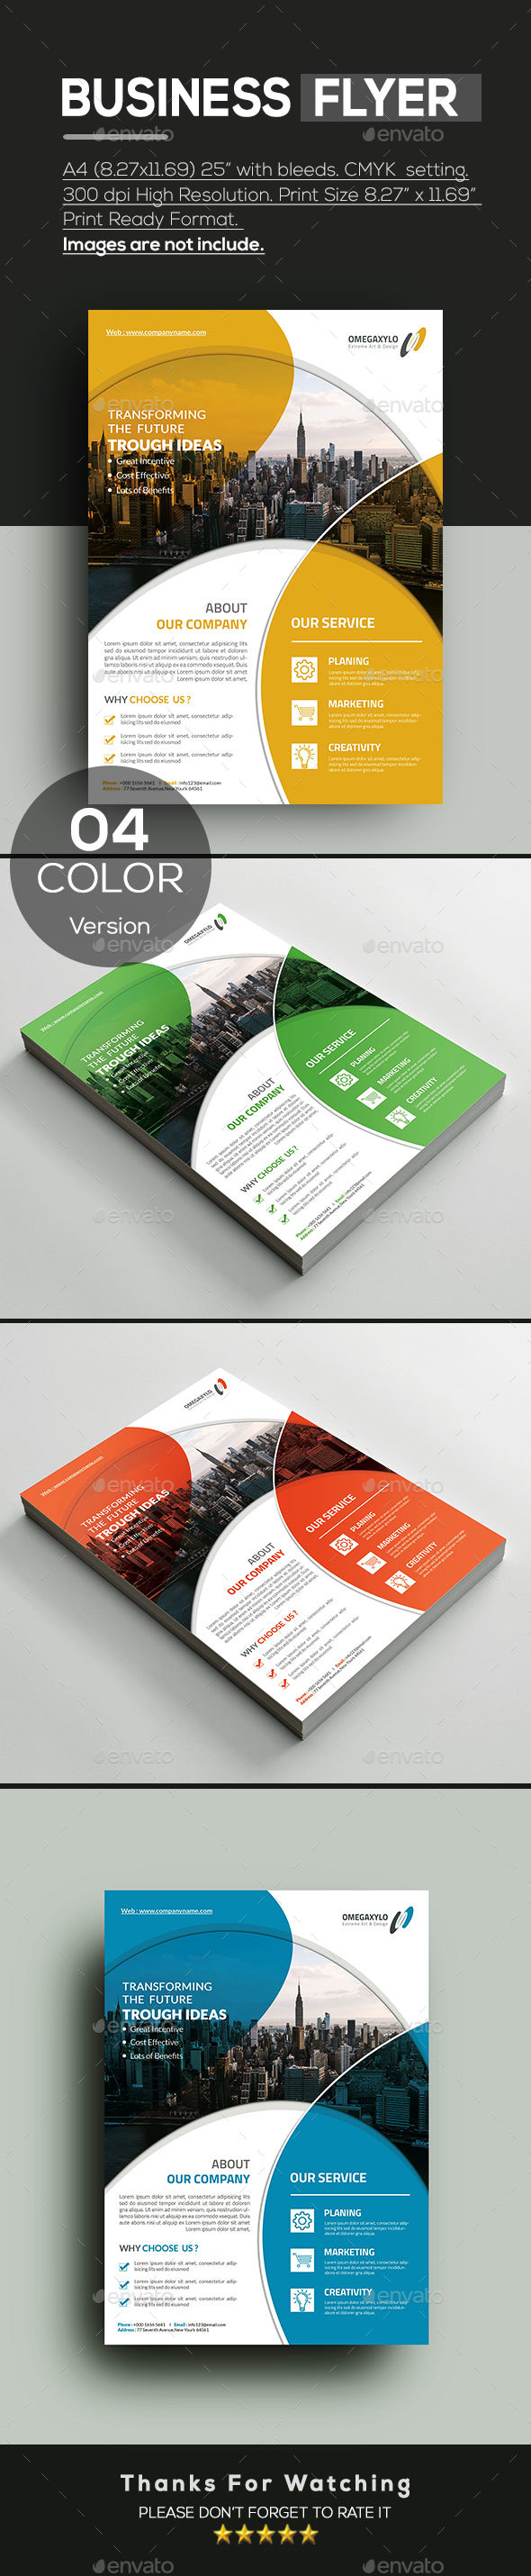 GraphicRiver Business Flyer 20891687